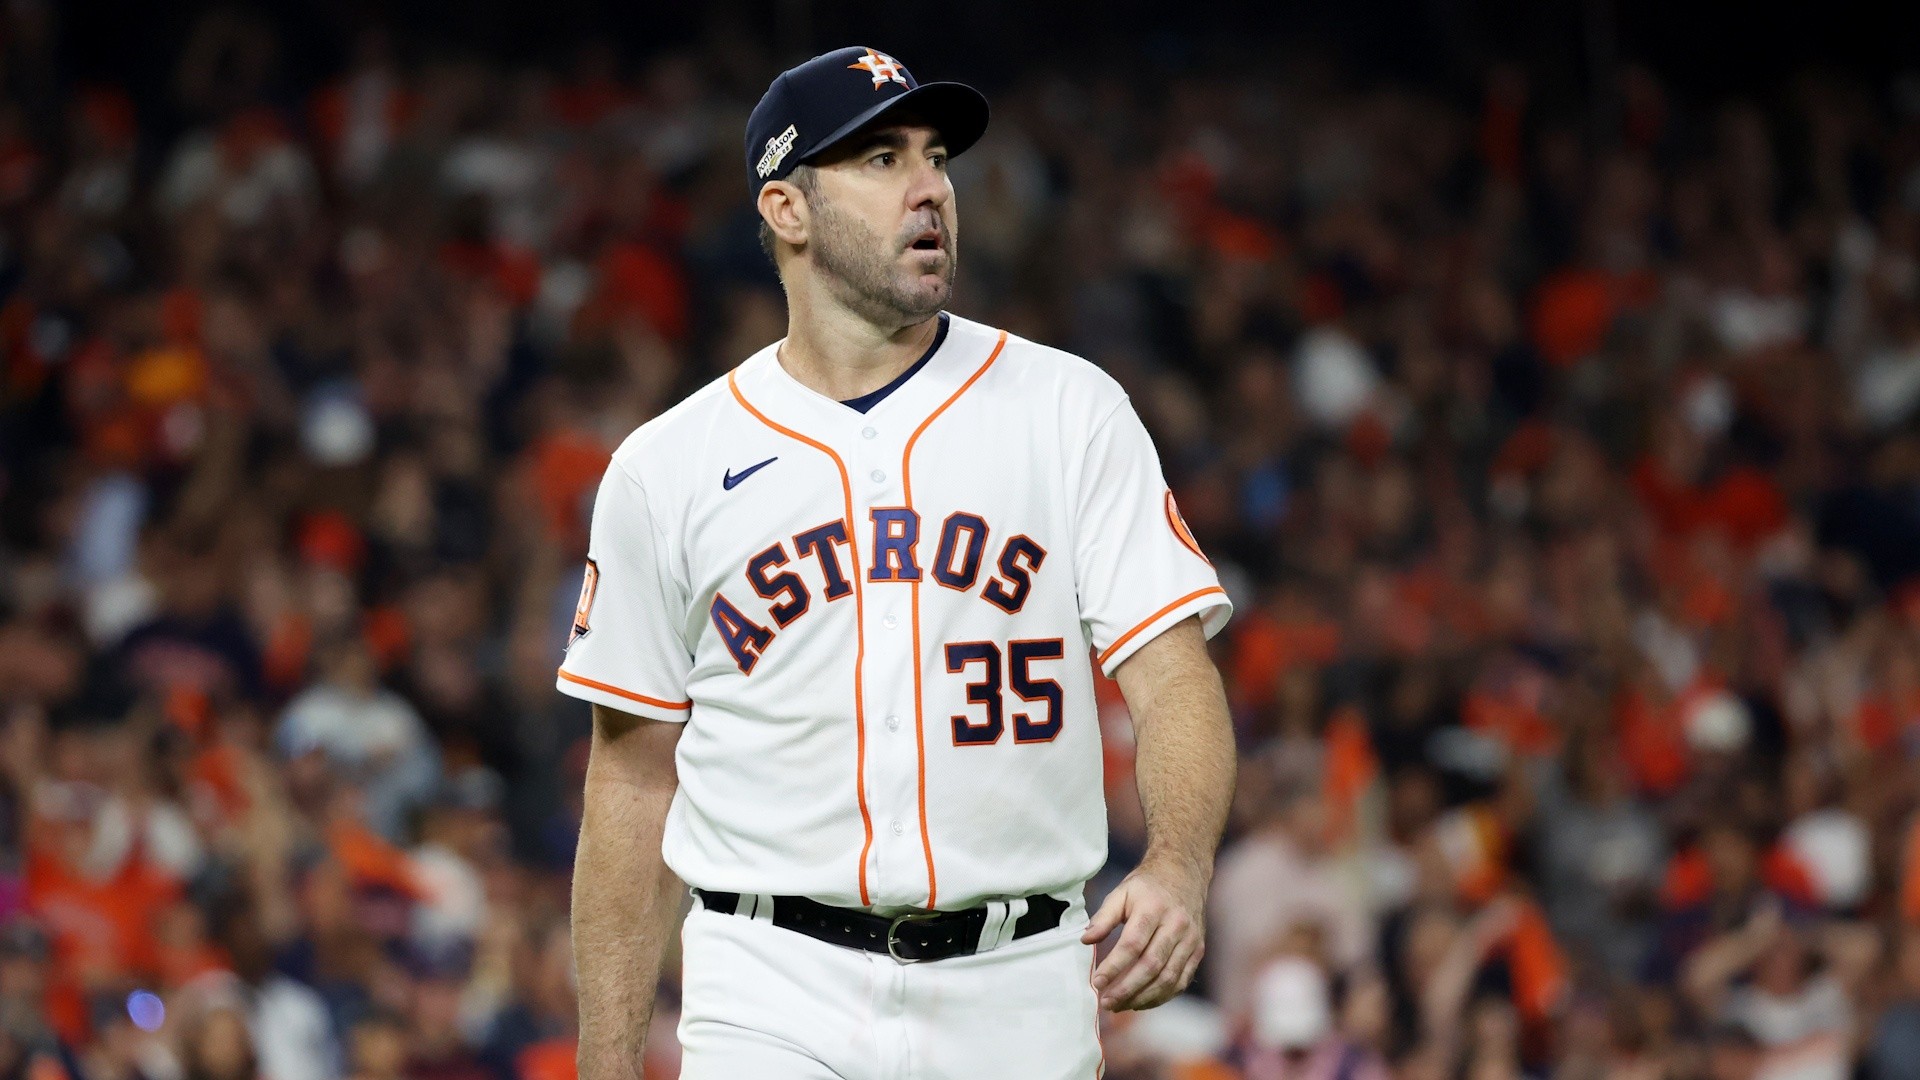 The Astros Players to Watch During the World Series